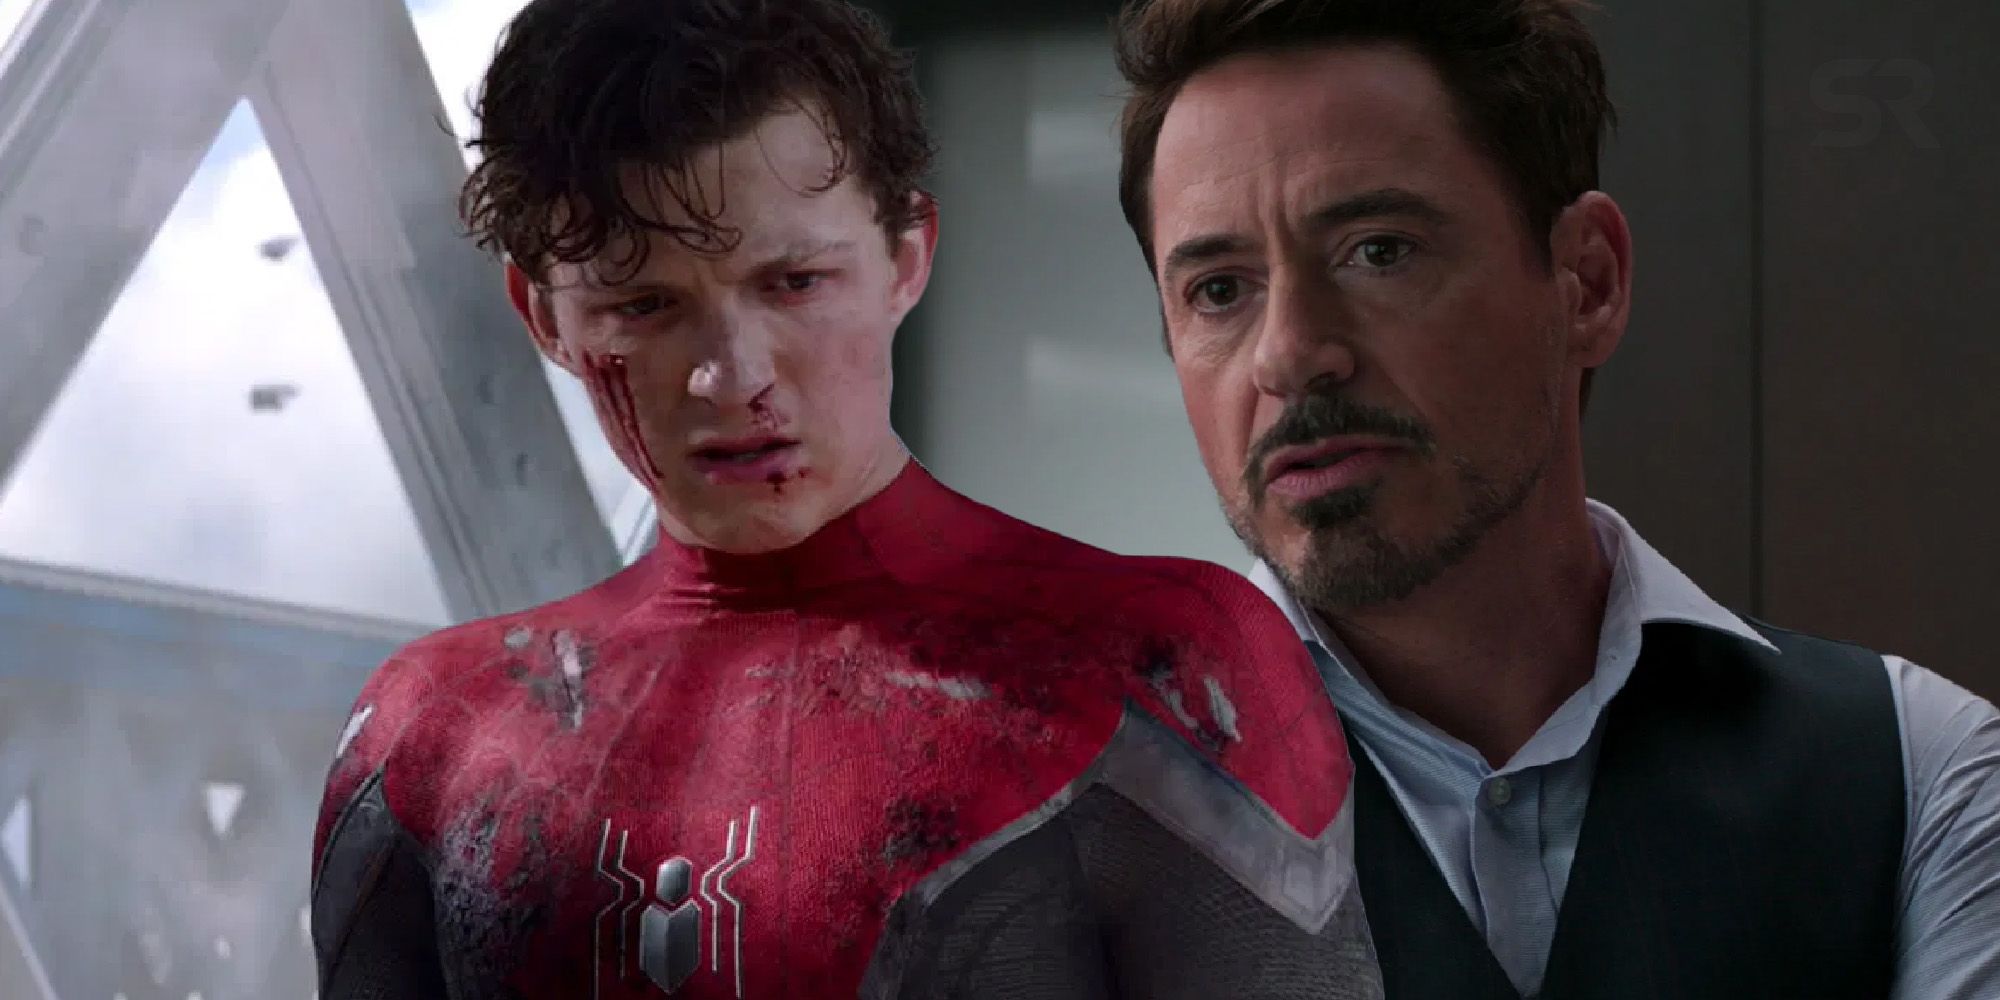 Tom Holland as Spider-Man in Spider-Man: Far From Home and Robert Downey Jr. as Tony Stark in Captain America: Civil War.